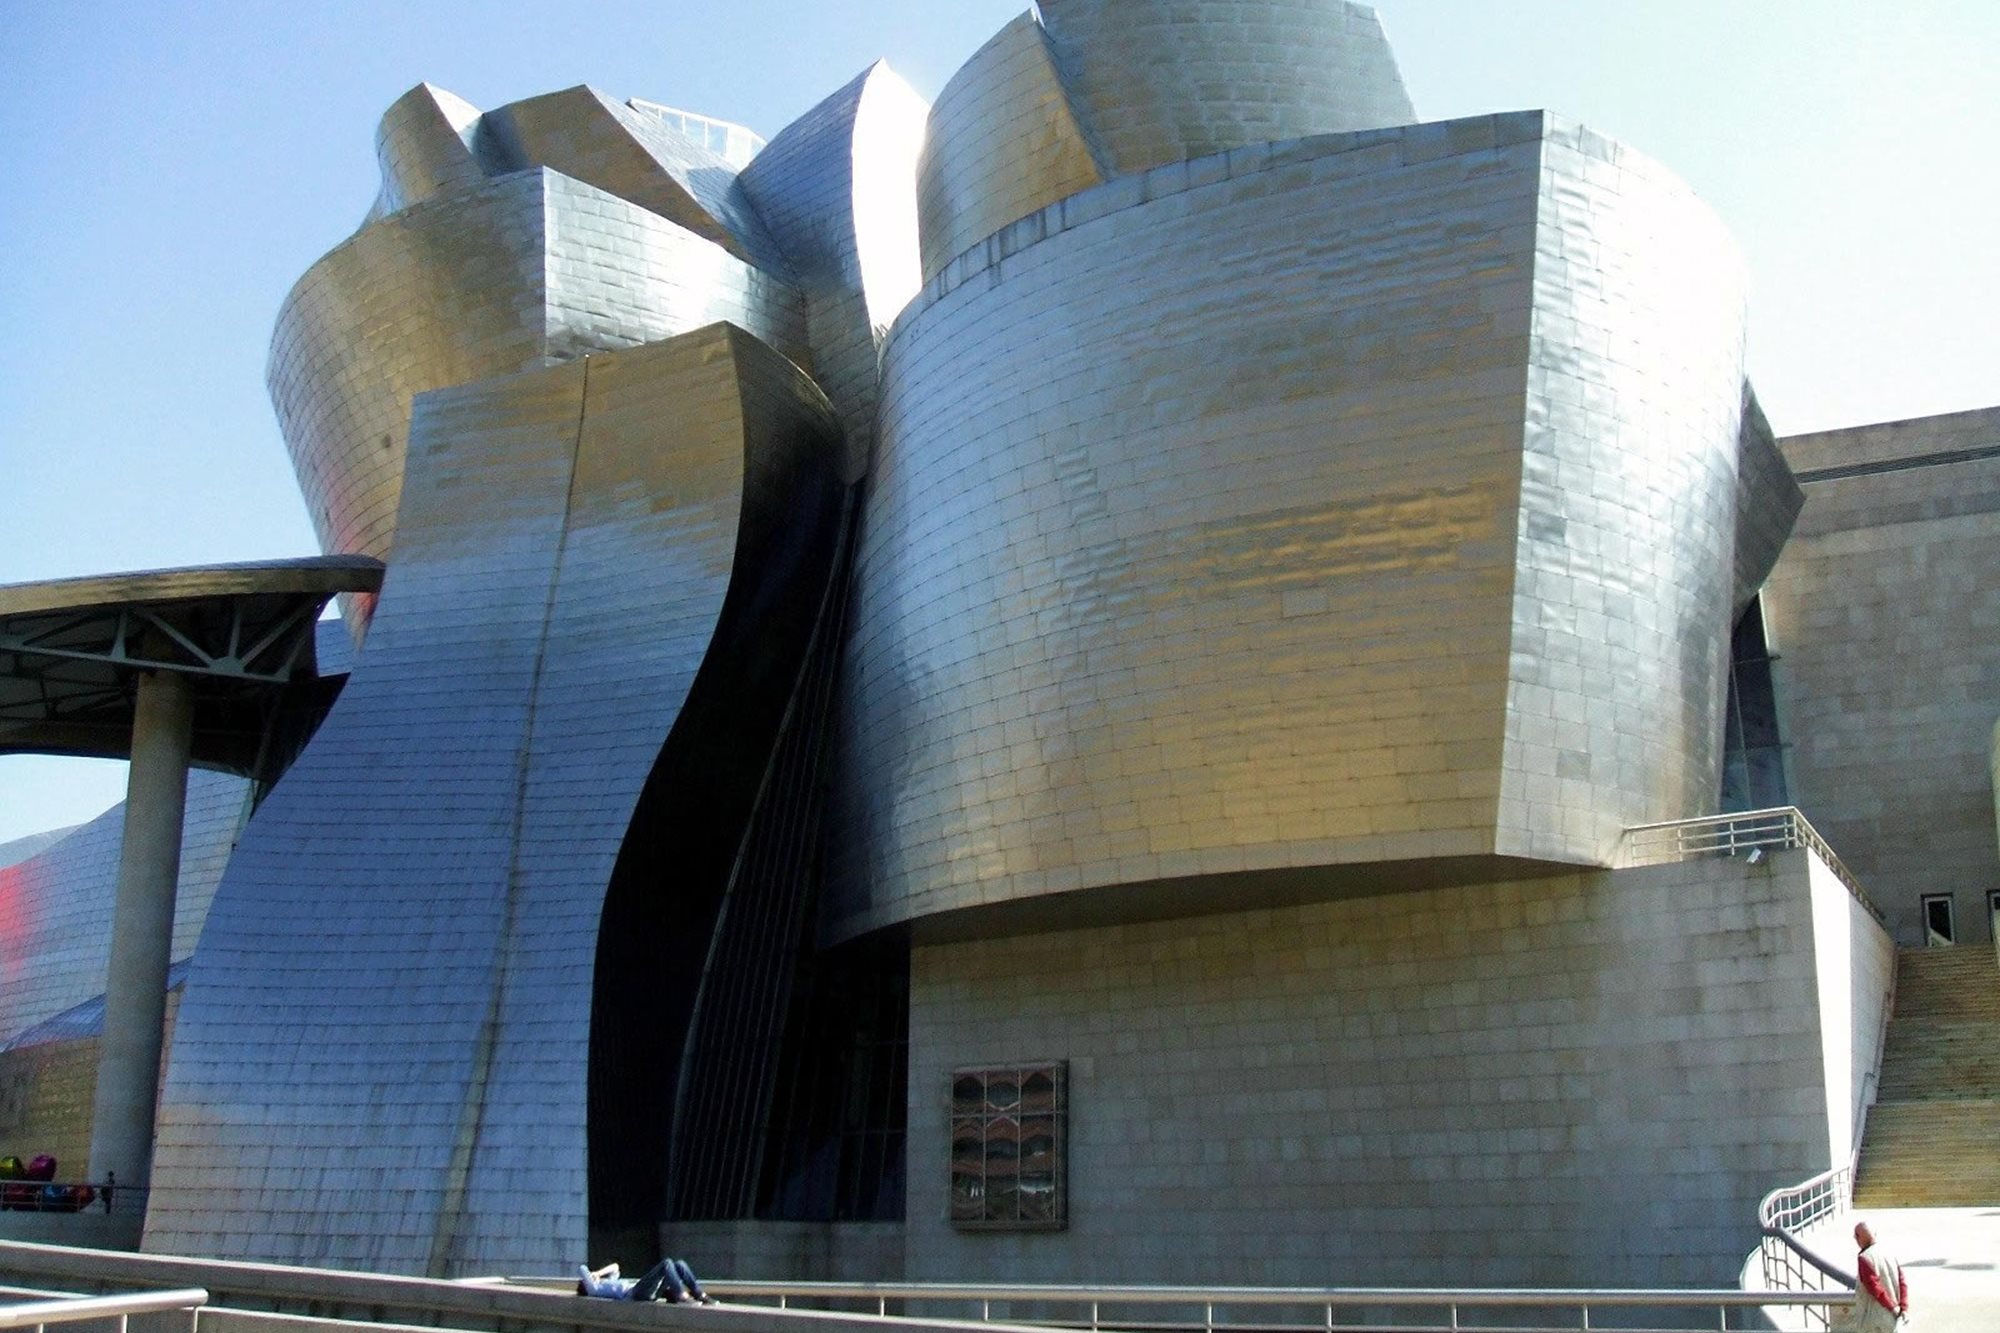 Guggenheim Museum Bilbao (Vizcaya): Information, rates, prices, tickets, how to get there, telephone, schedules, map, photo, books and guides, guided visits and tours